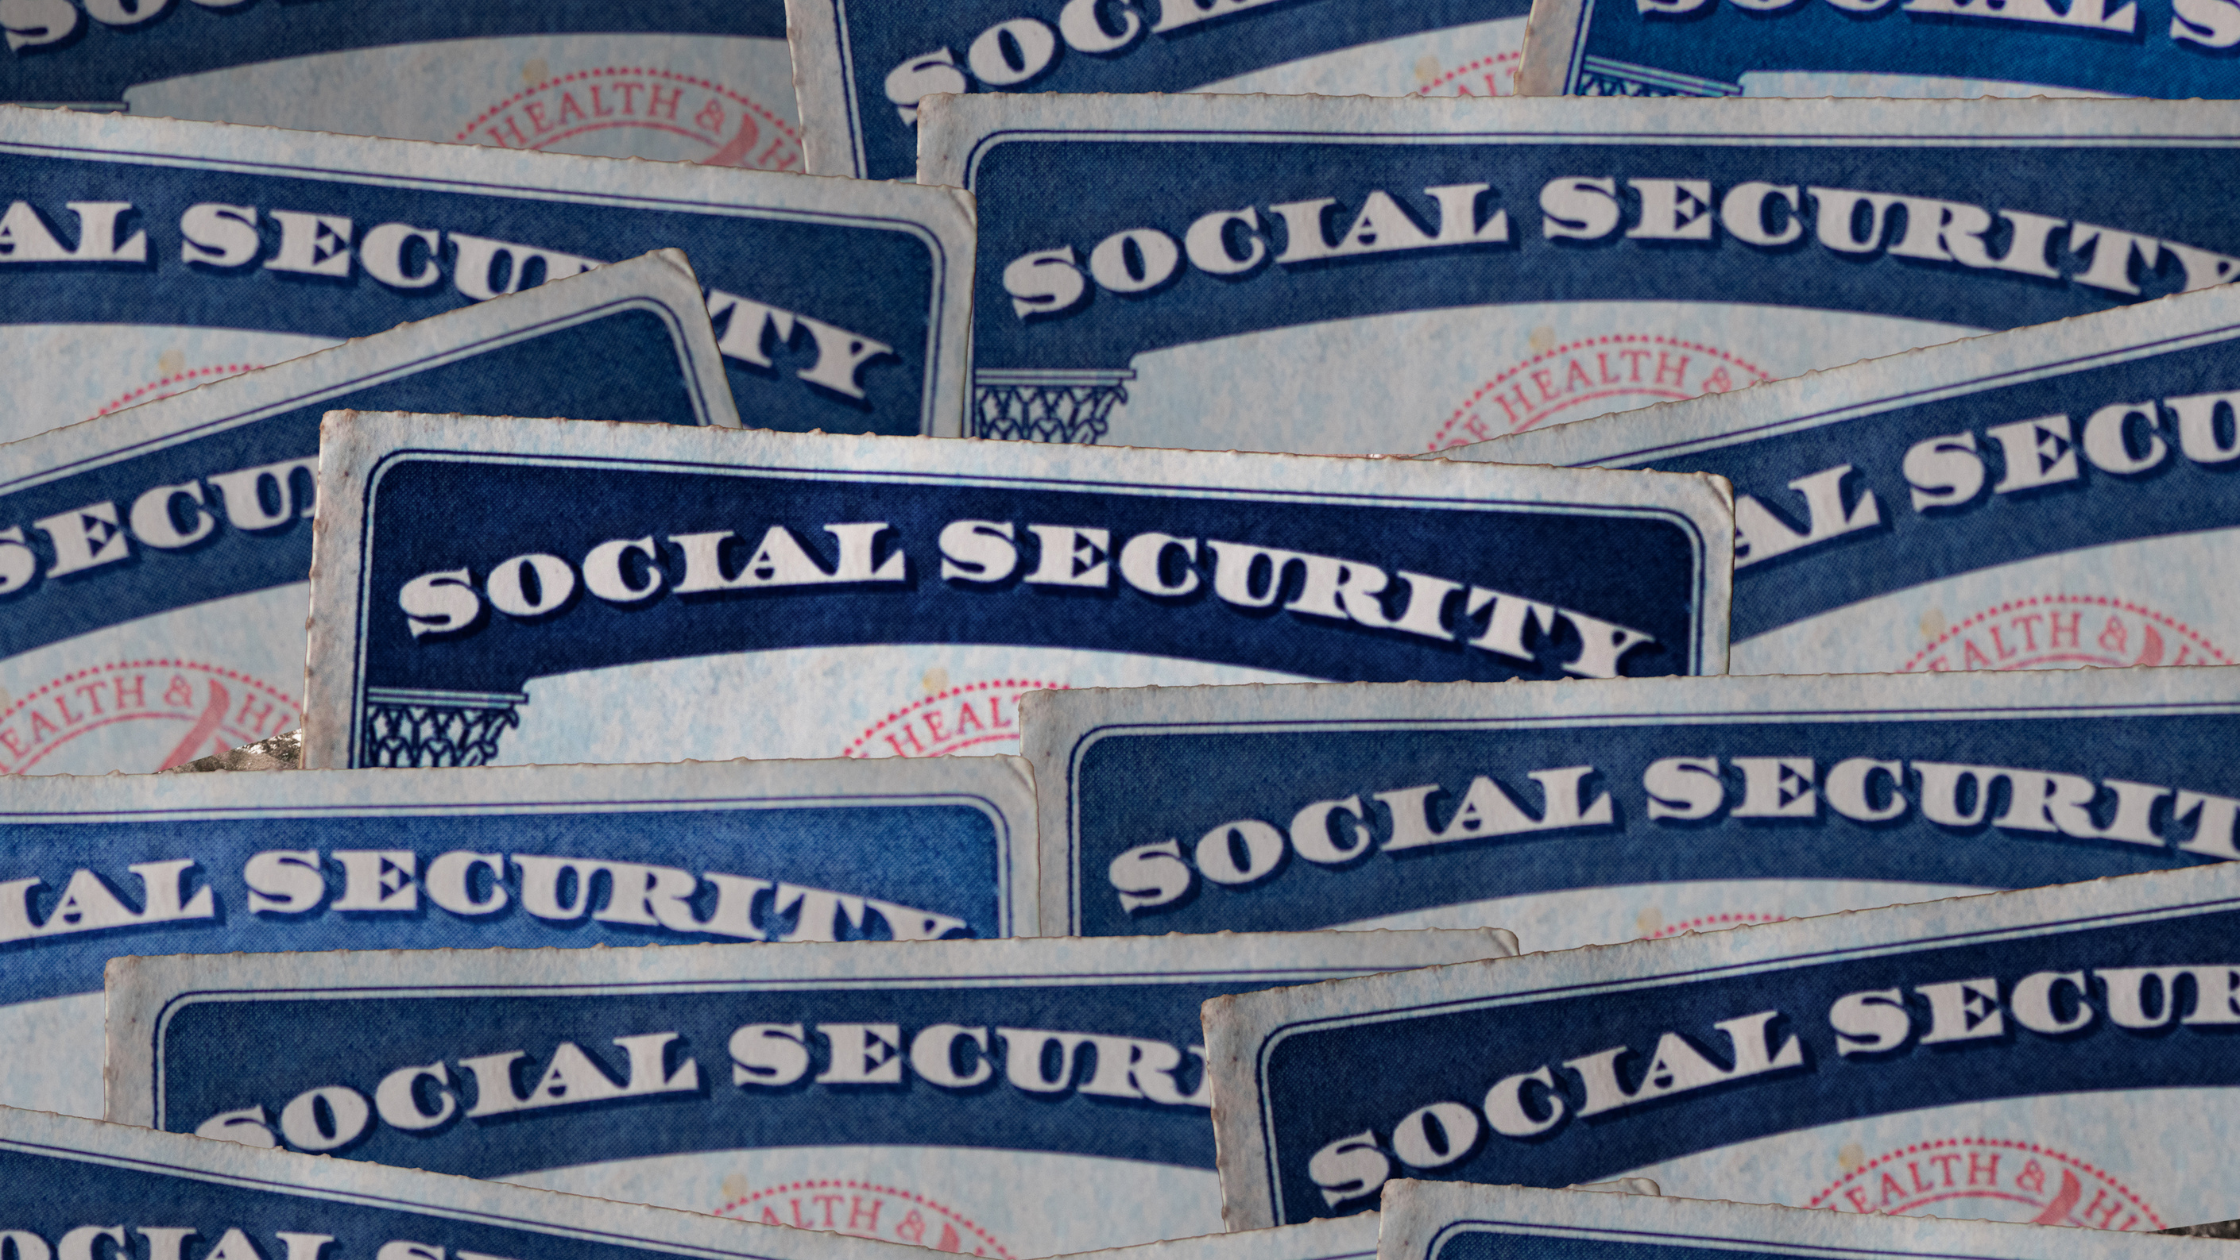 Stacked social security cards